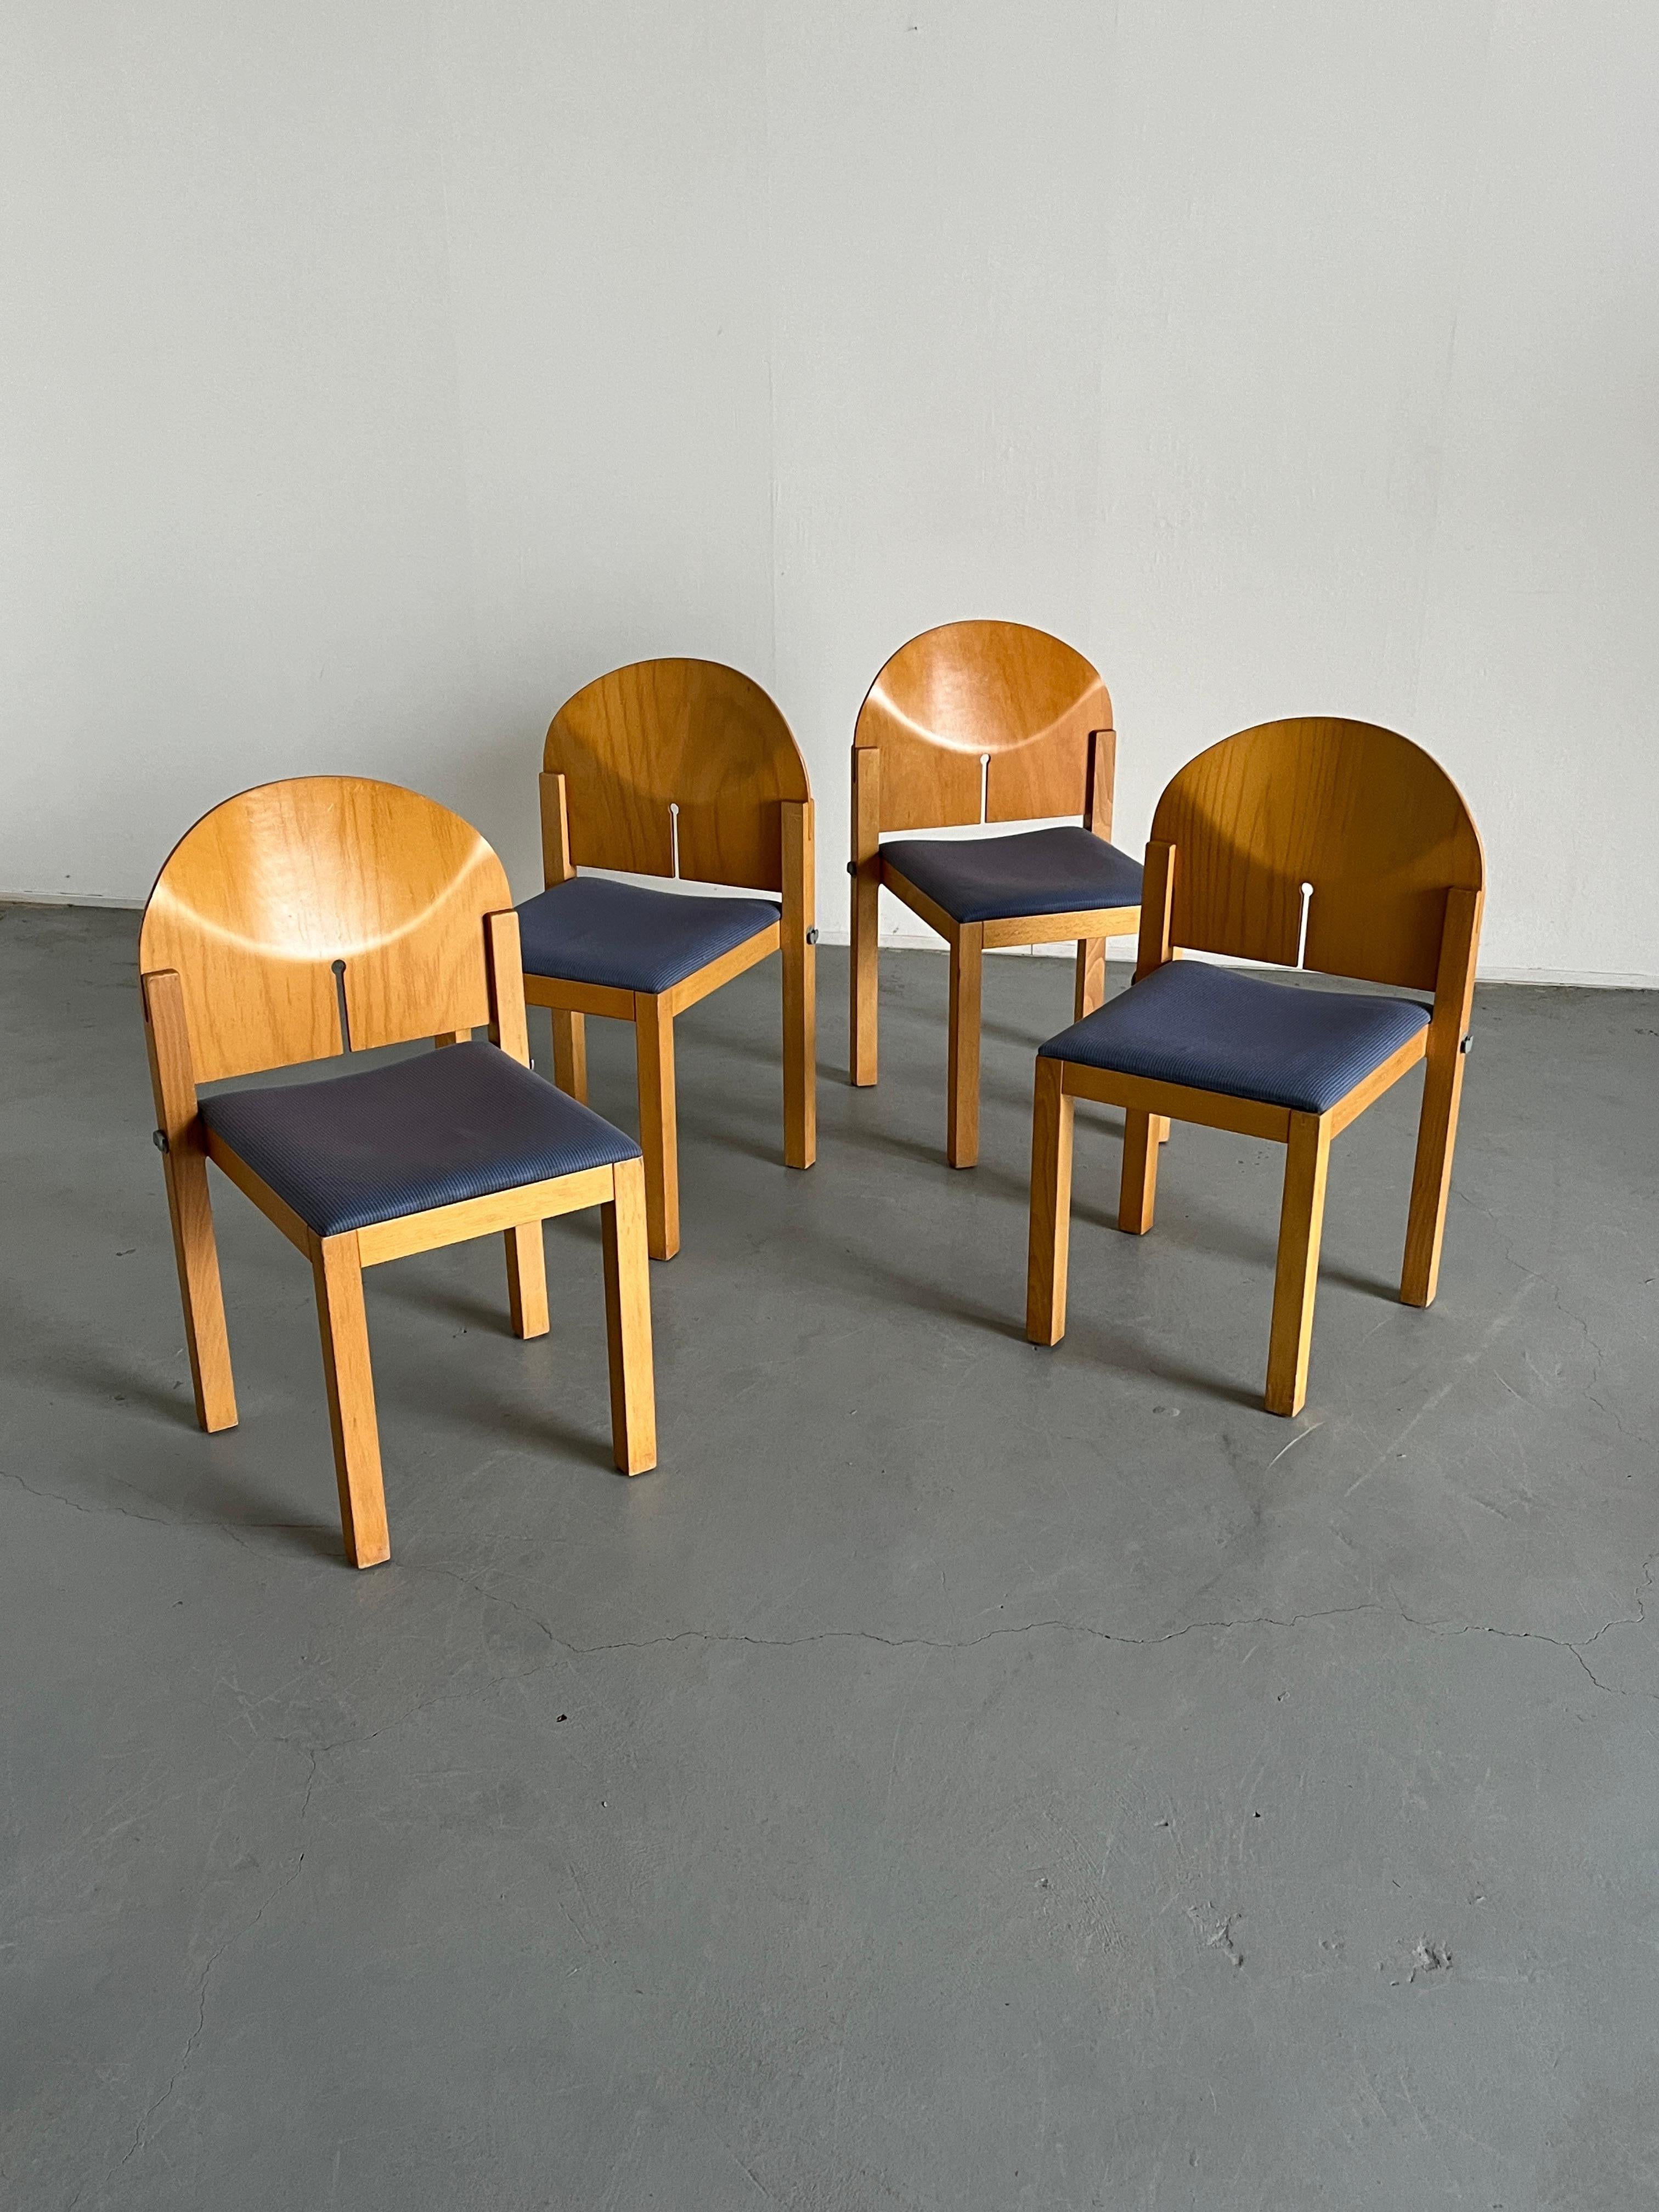 German Set of 4 Postmodern Sculptural Wooden Dining Chairs by Arno Votteler, 1980s